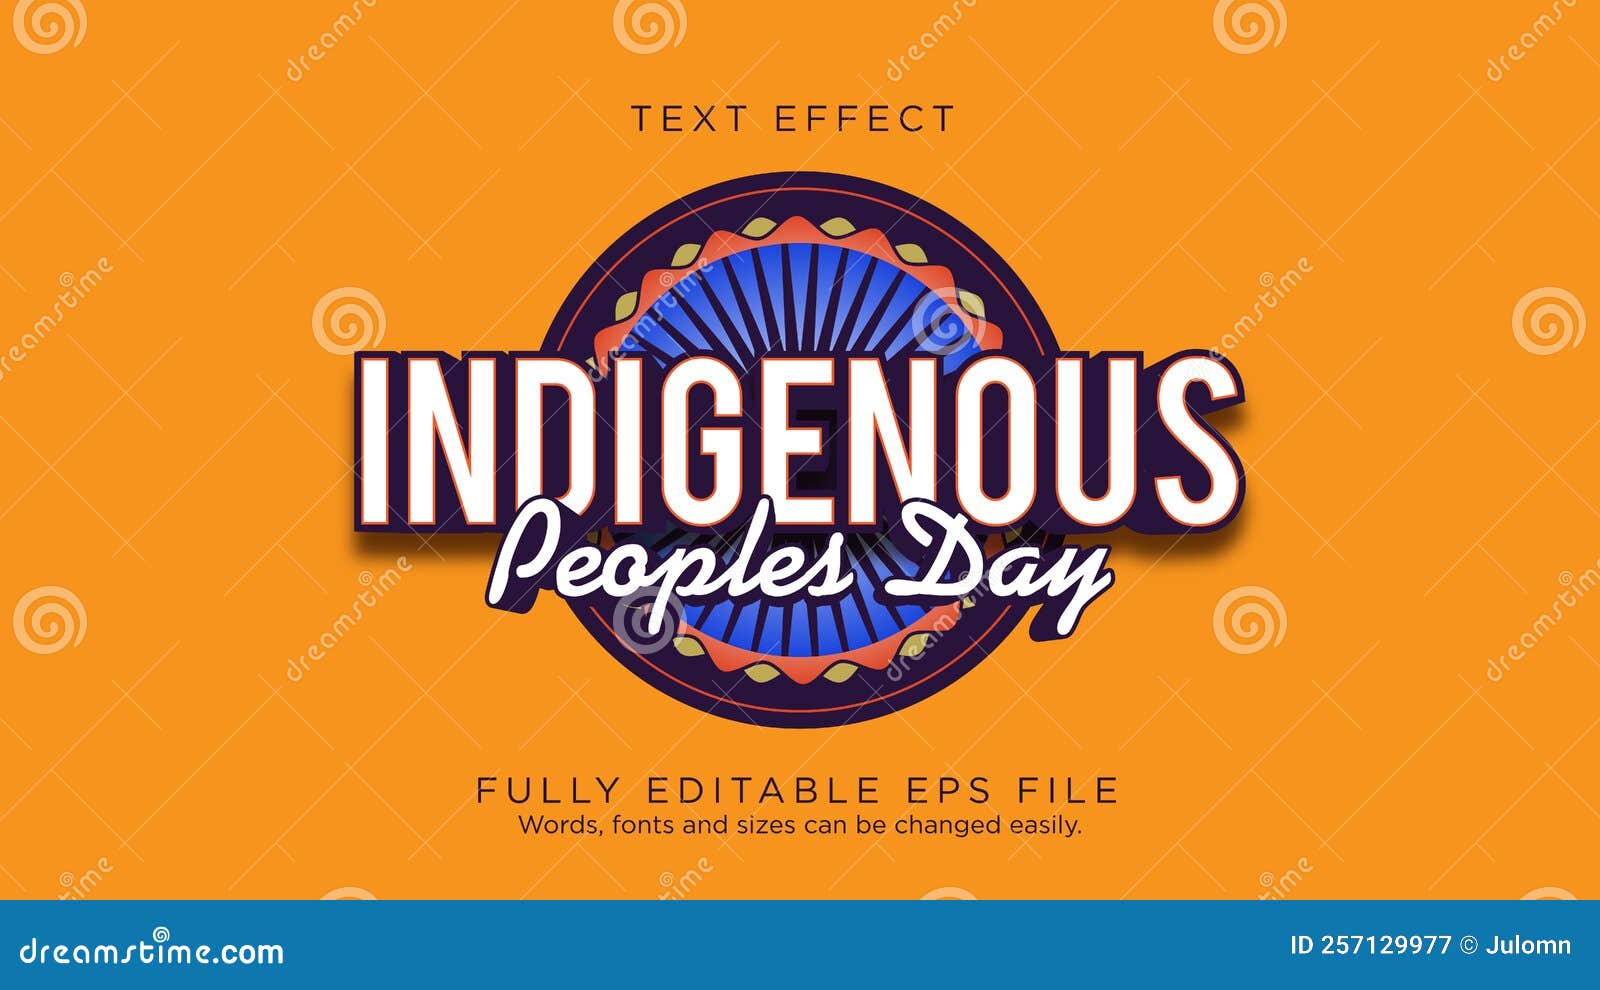 indigenous peoples day text effect font type  simple logo background